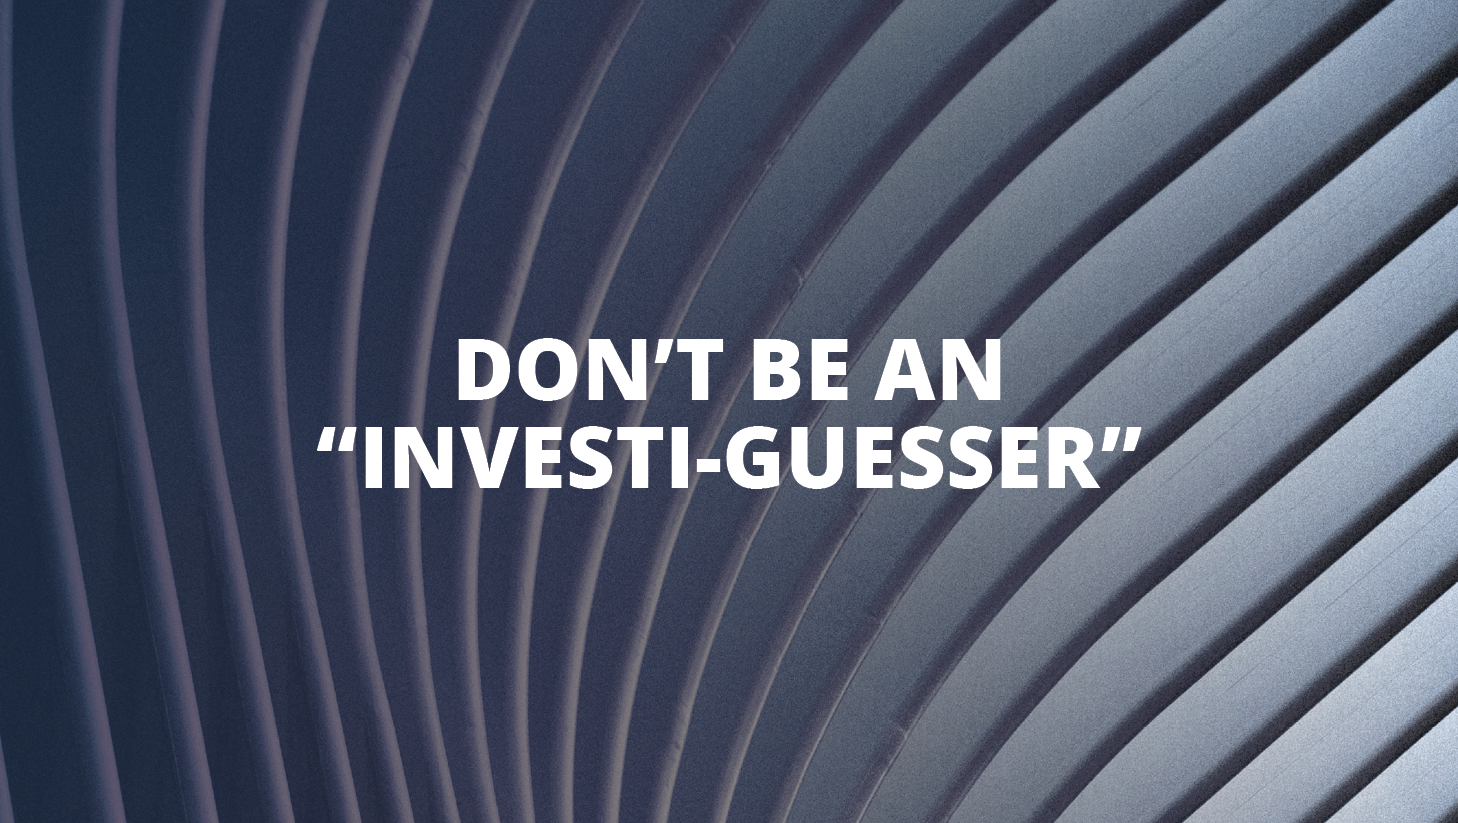 Don’t be an “investi-guesser”